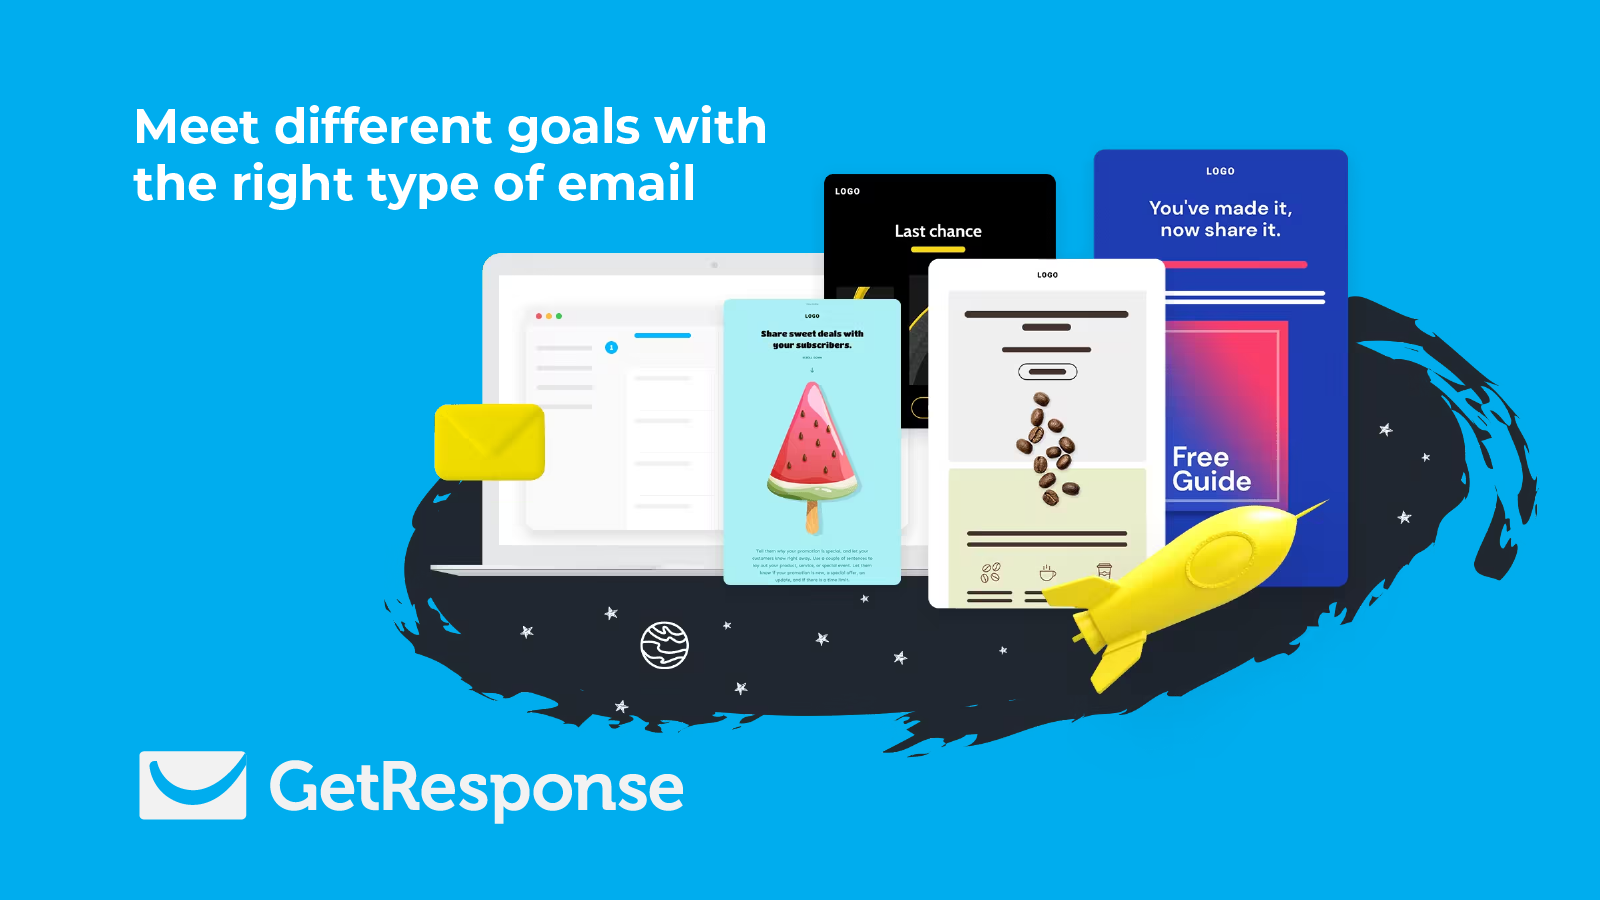 Meet different goals with the right type of email